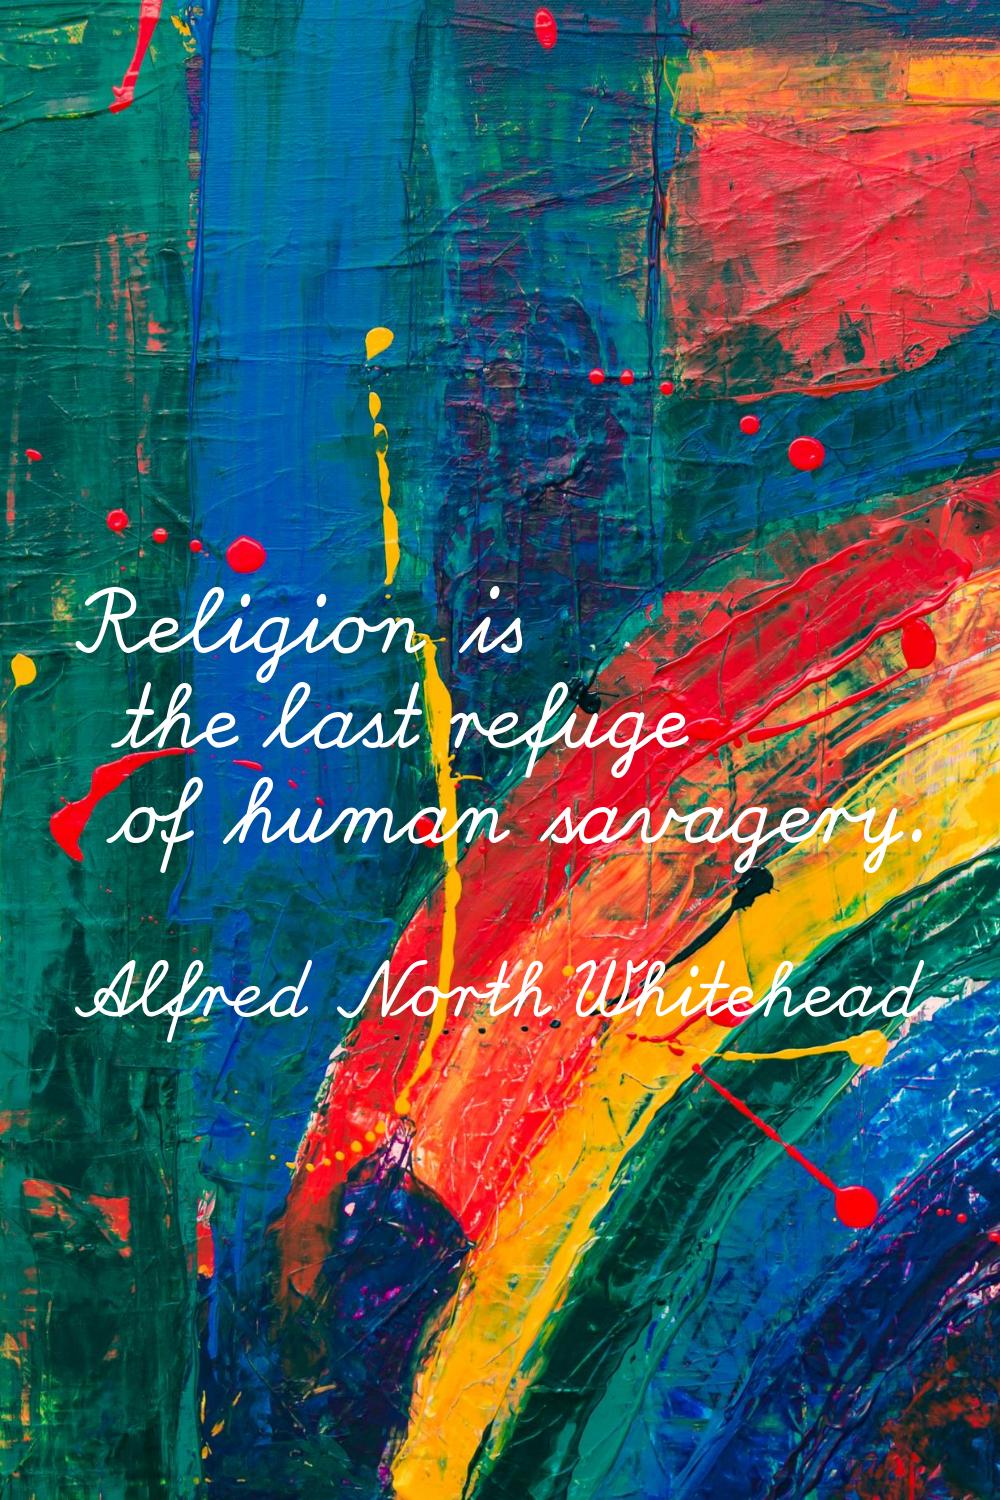 Religion is the last refuge of human savagery.